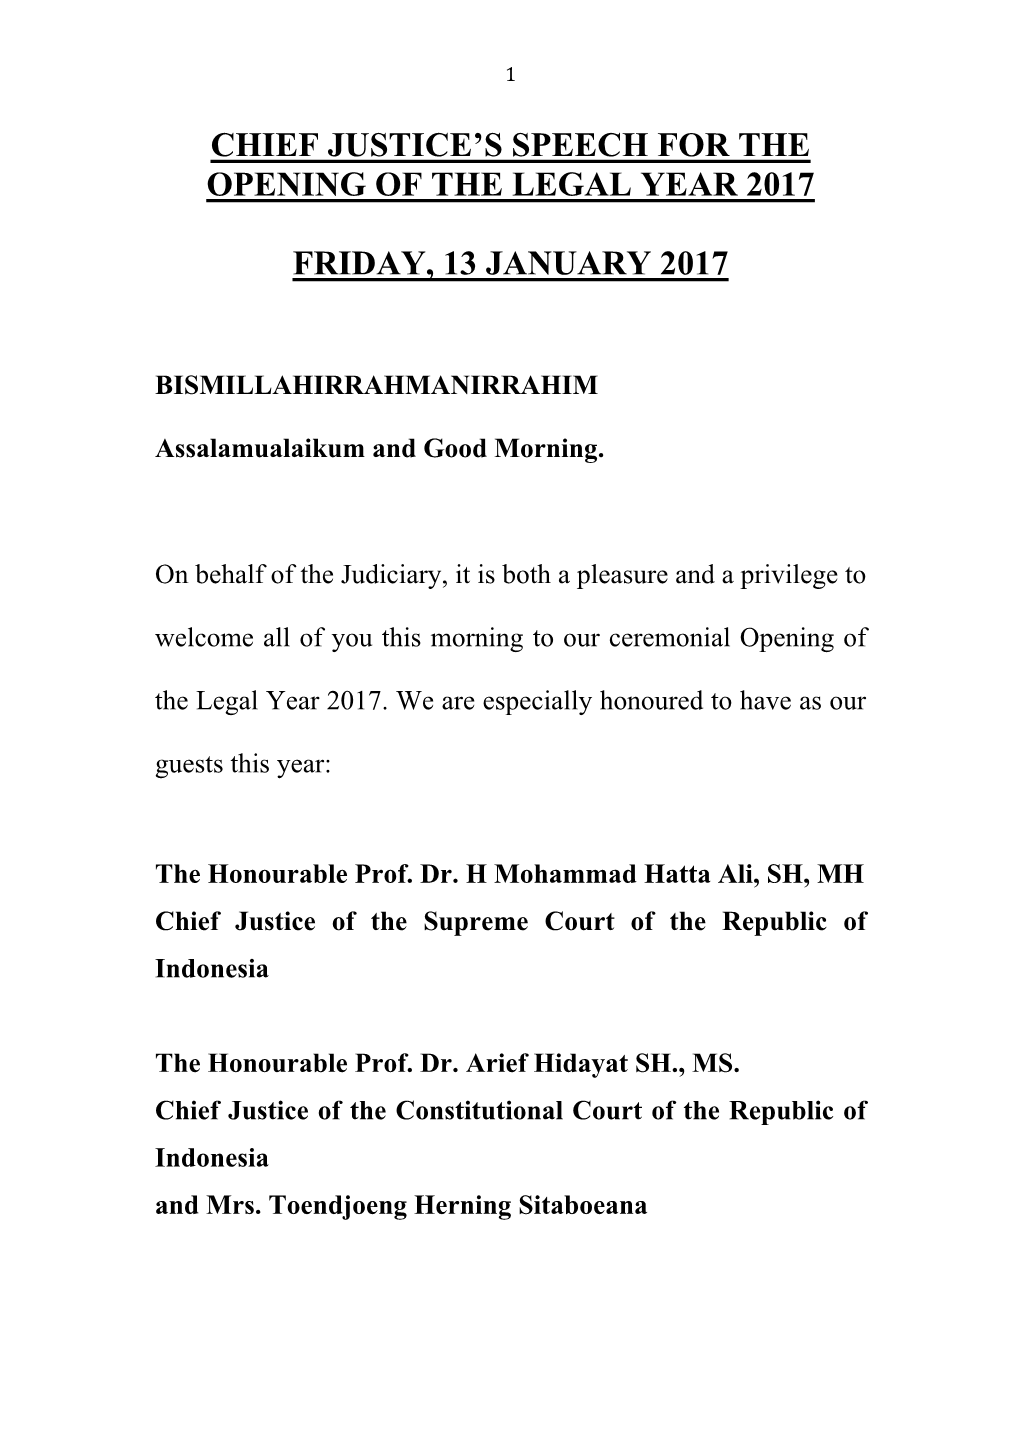 Chief Justice's Speech for the Opening of the Legal Year 2017 Friday, 13 January 2017